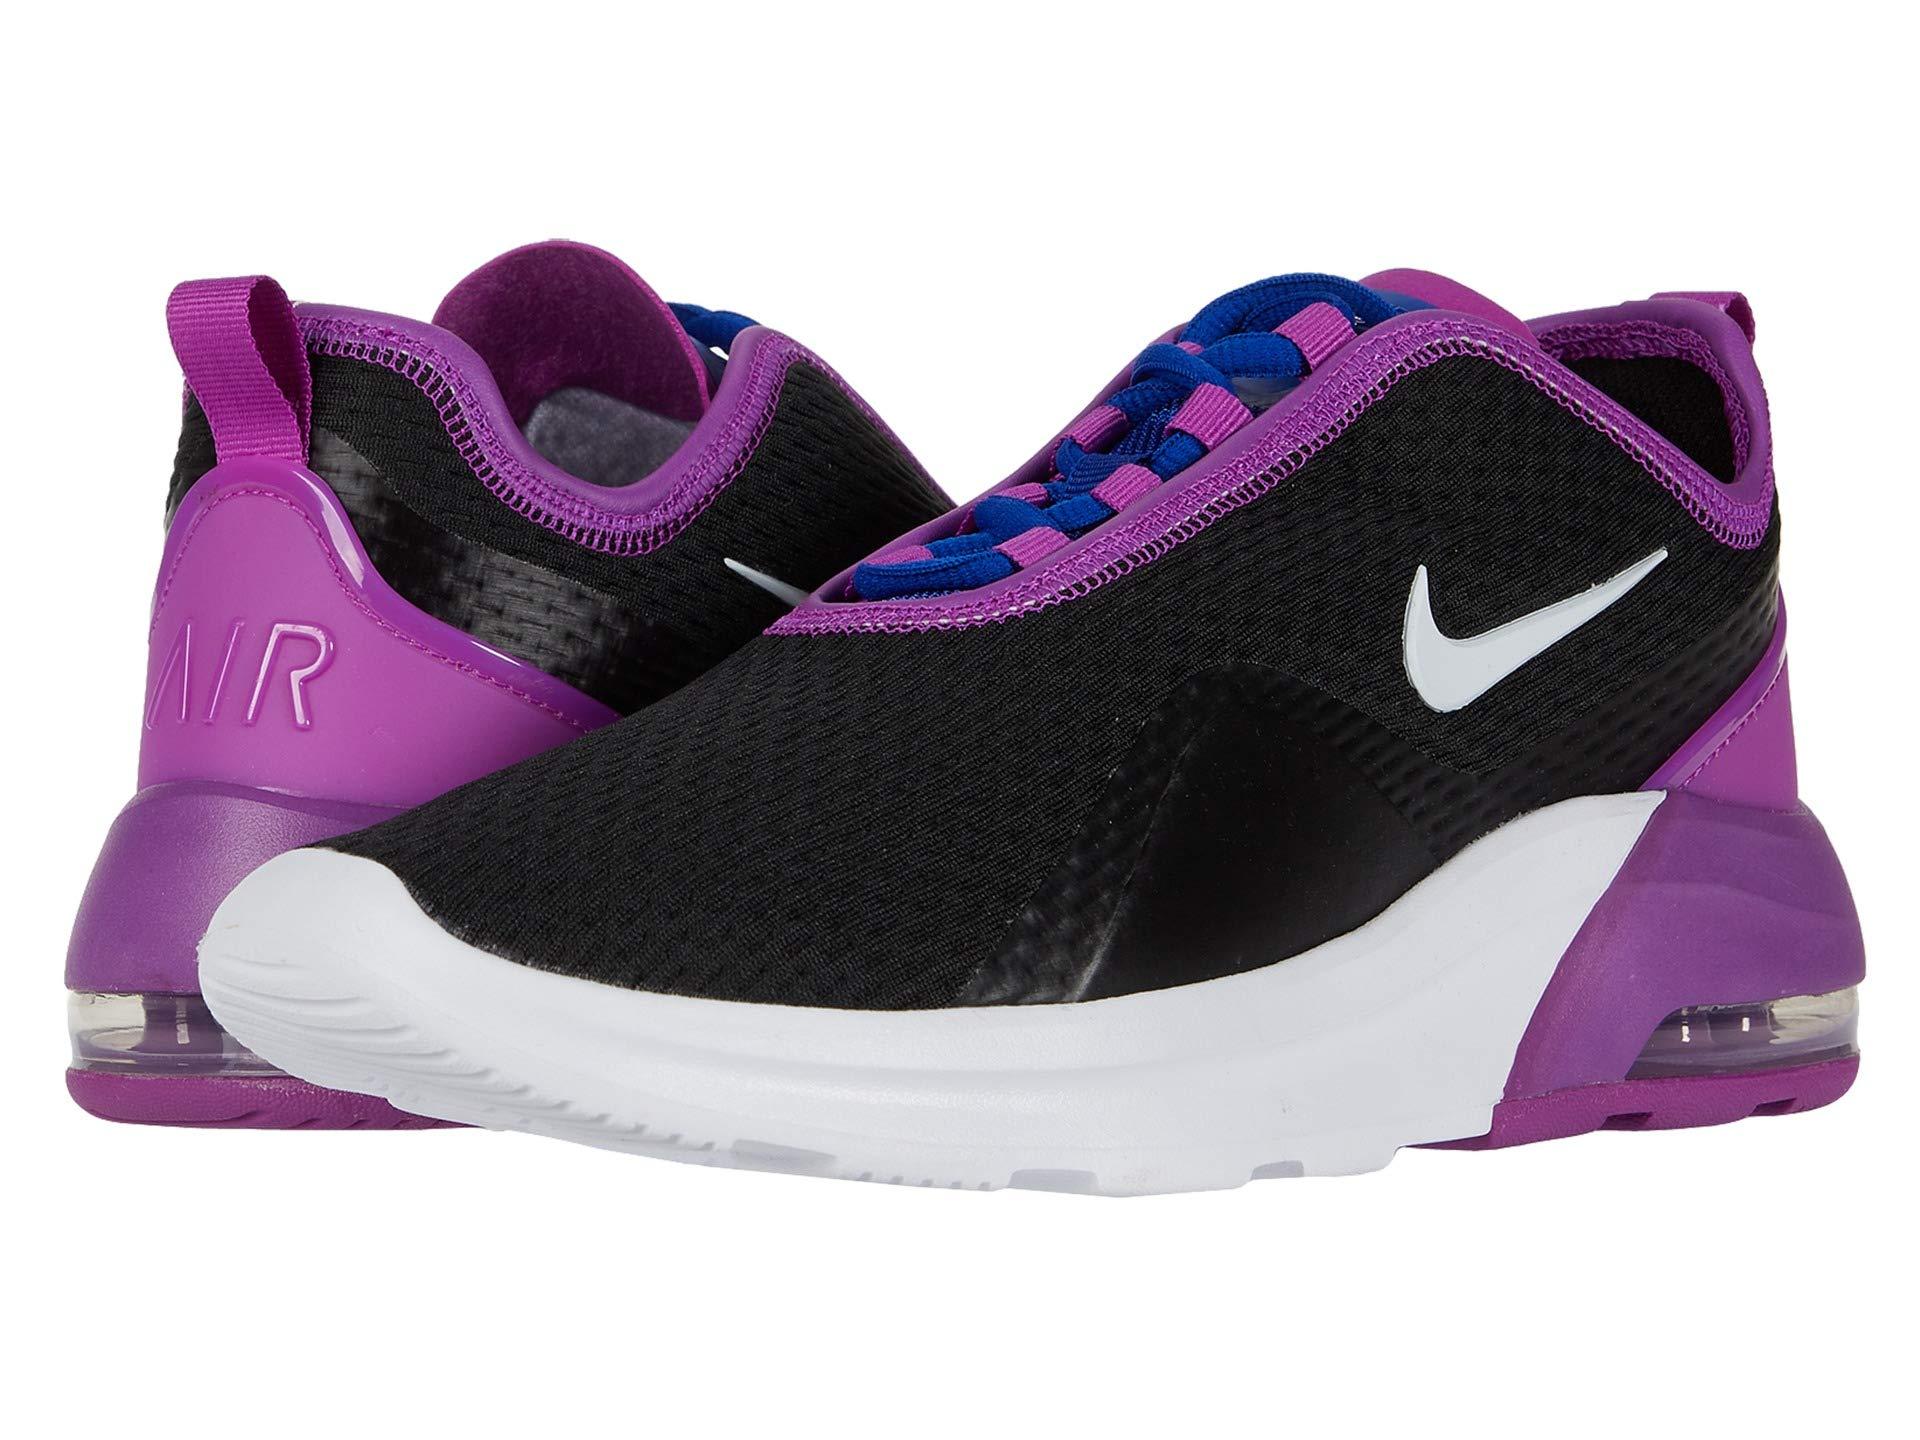 Nike Rubber Air Max Motion 2 Sneakers in Purple - Lyst